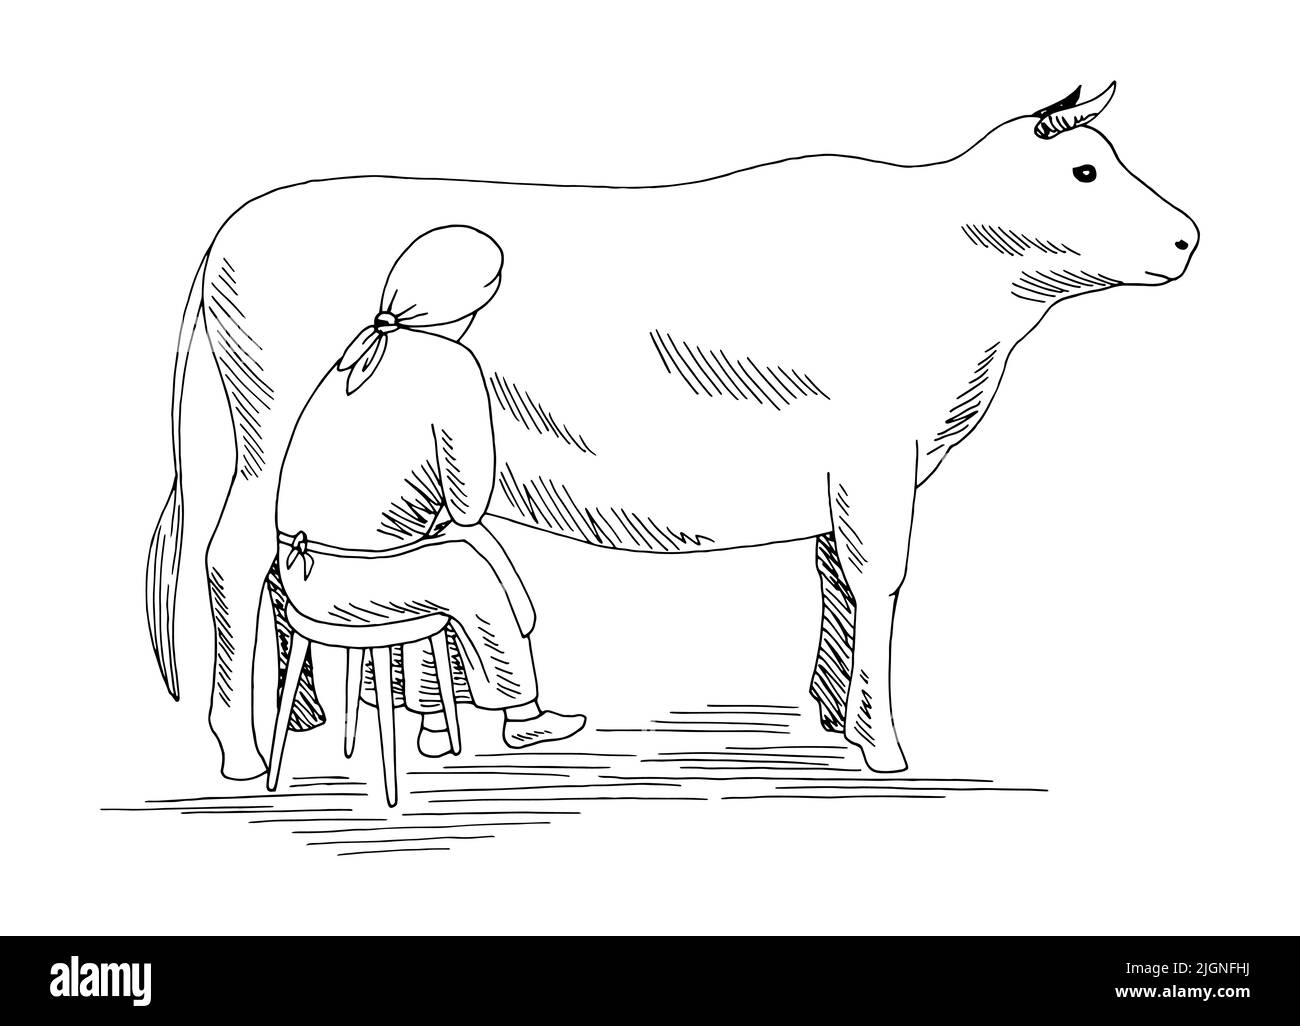 Woman milking a cow graphic black white isolated sketch illustration vector Stock Vector